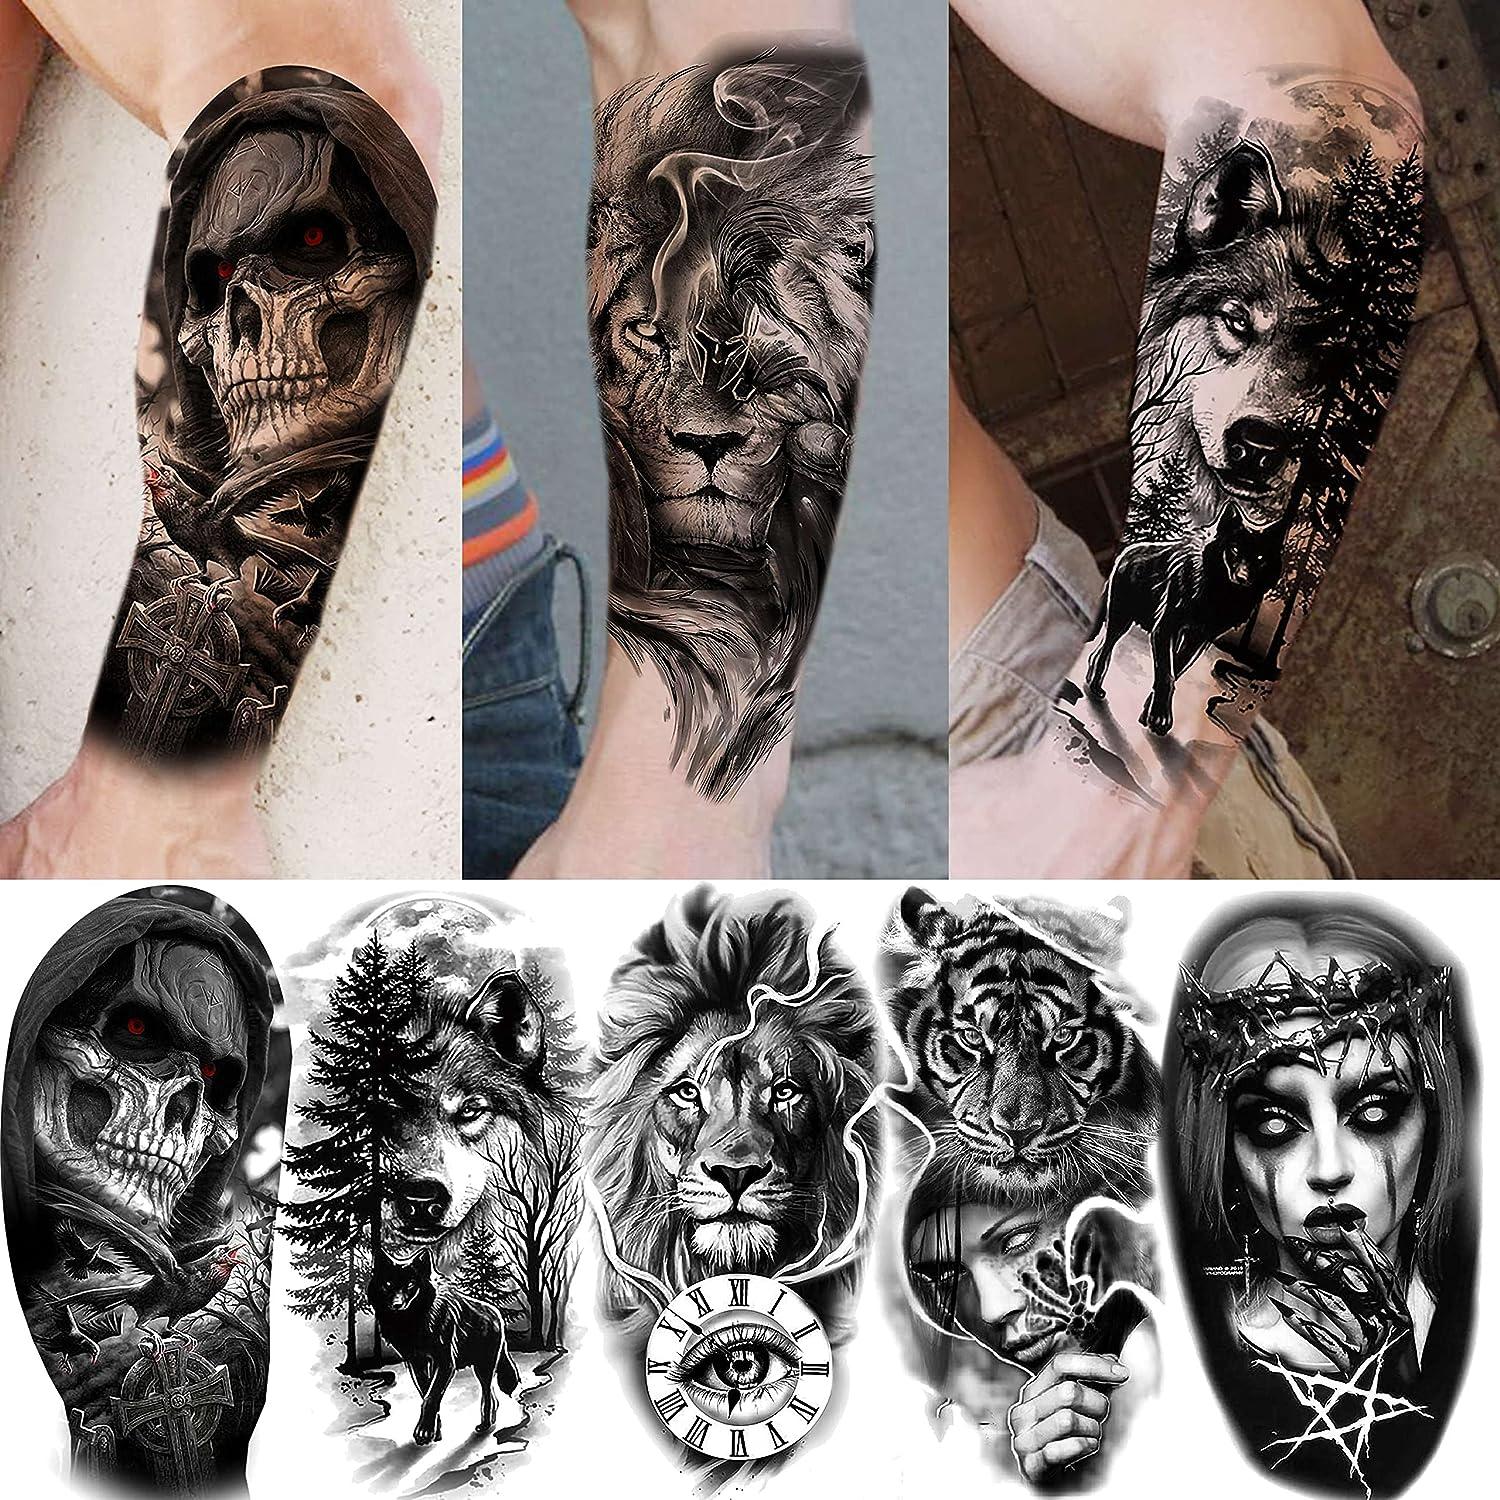 Tattoo Idea: 27 Japanese Hannya Tattoo Styles from Traditional to Modern